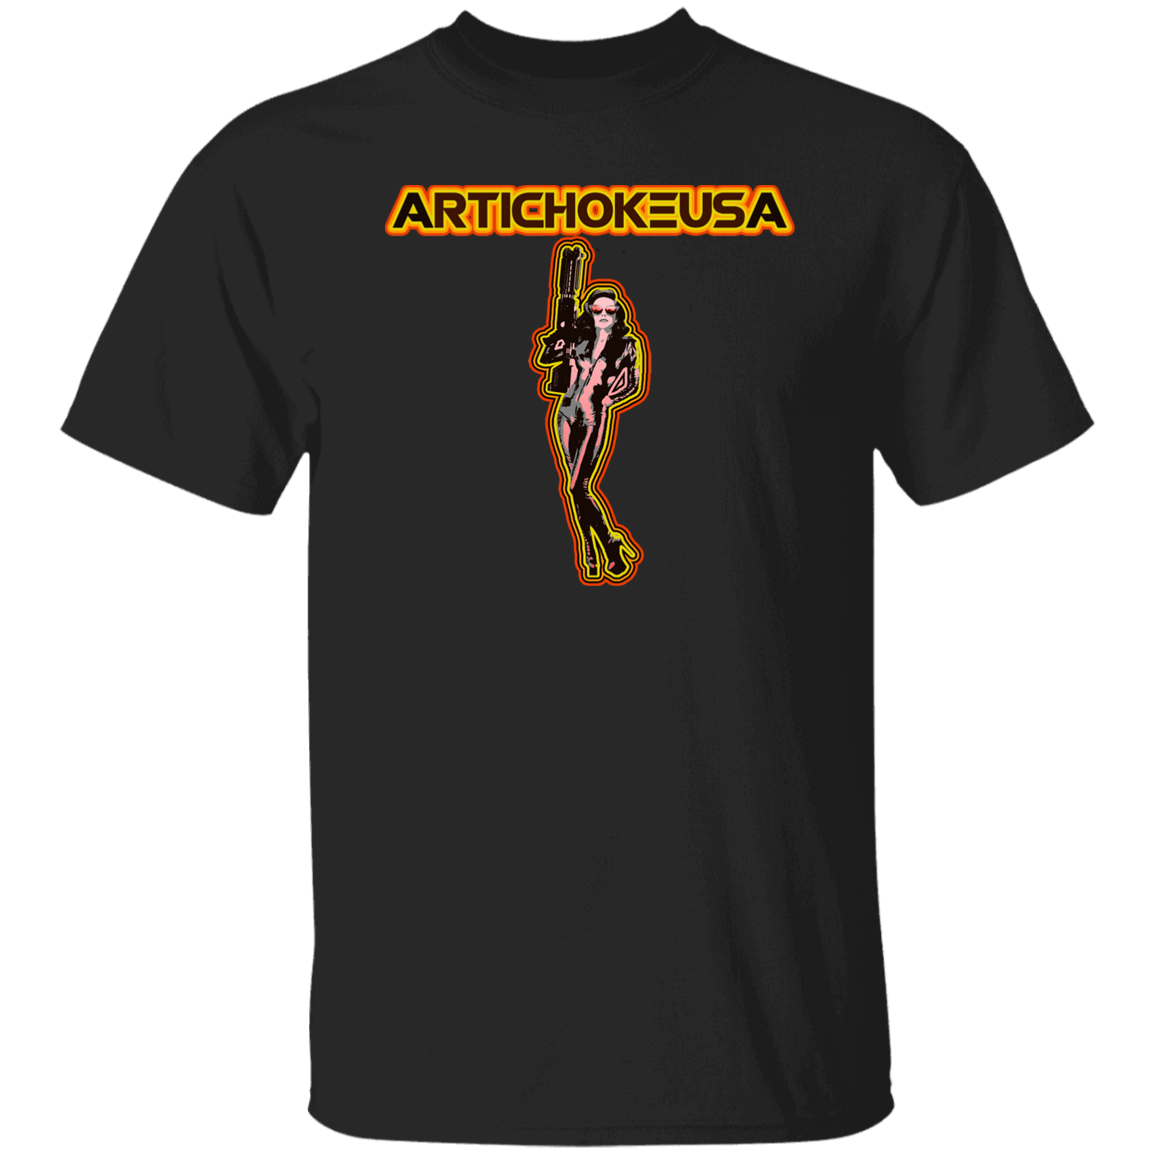 ArtichokeUSA Character and Font design. Let's Create Your Own Team Design Today. Mary Boom Boom. 100% Cotton T-Shirt